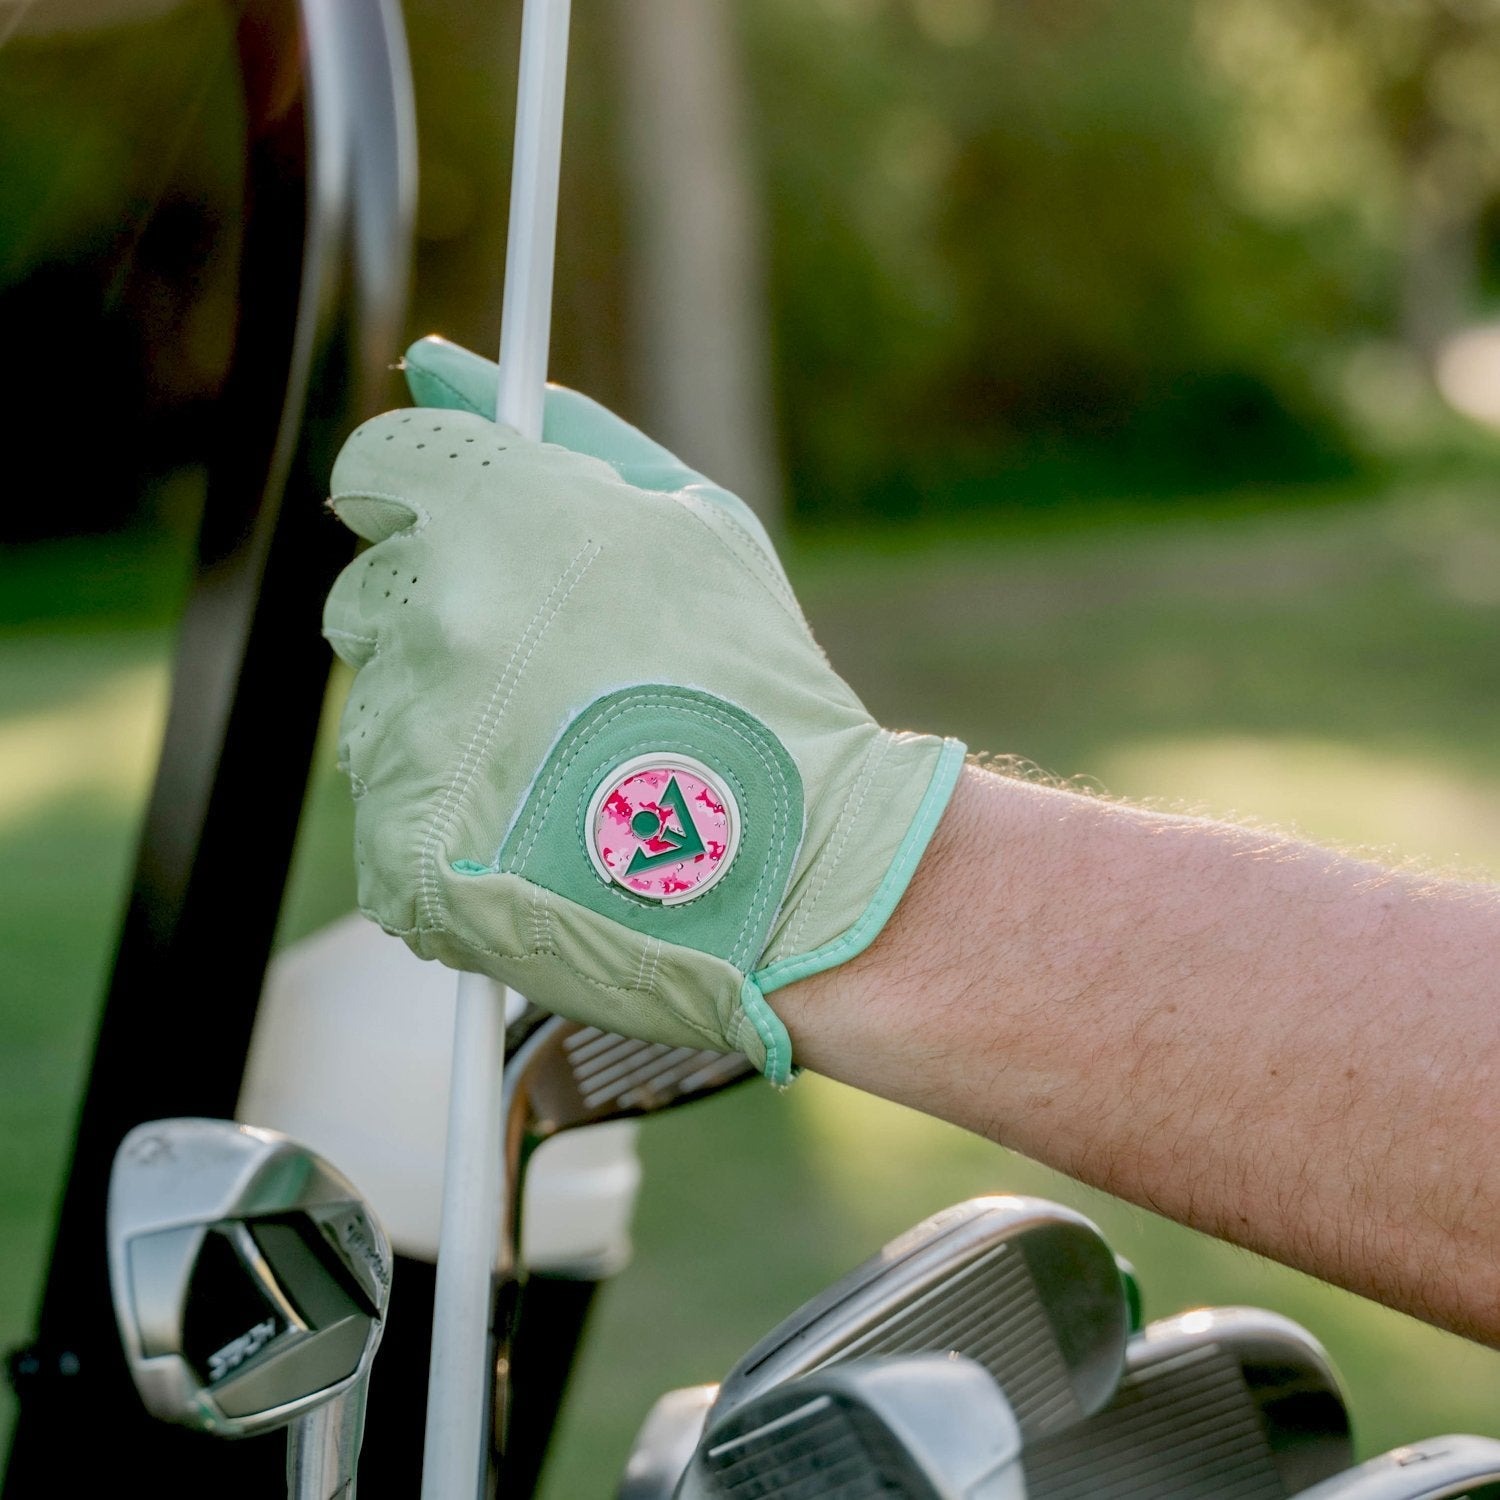 Close up of men's mint green golf glove with pink ball marker putting away a golf club in his bag.